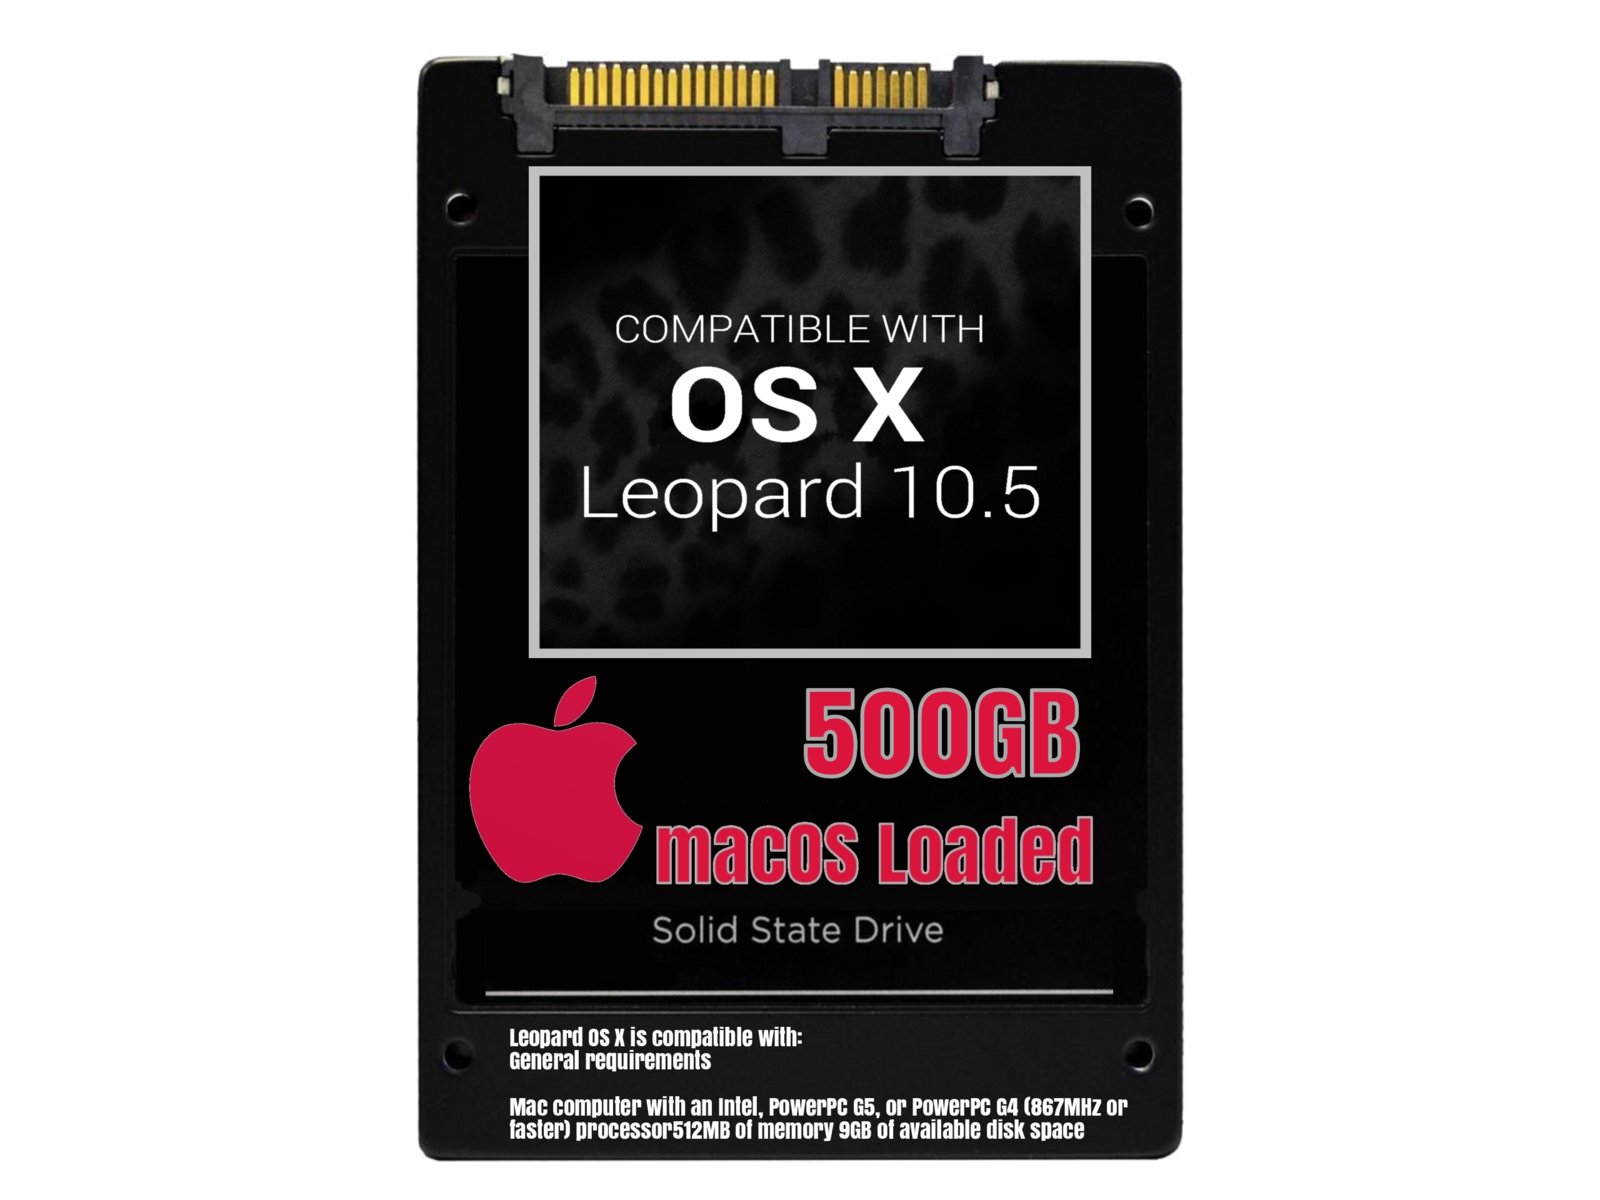 macOS Mac OS X 10.5 Leopard Preloaded on 500GB Solid State Drive - $69.99